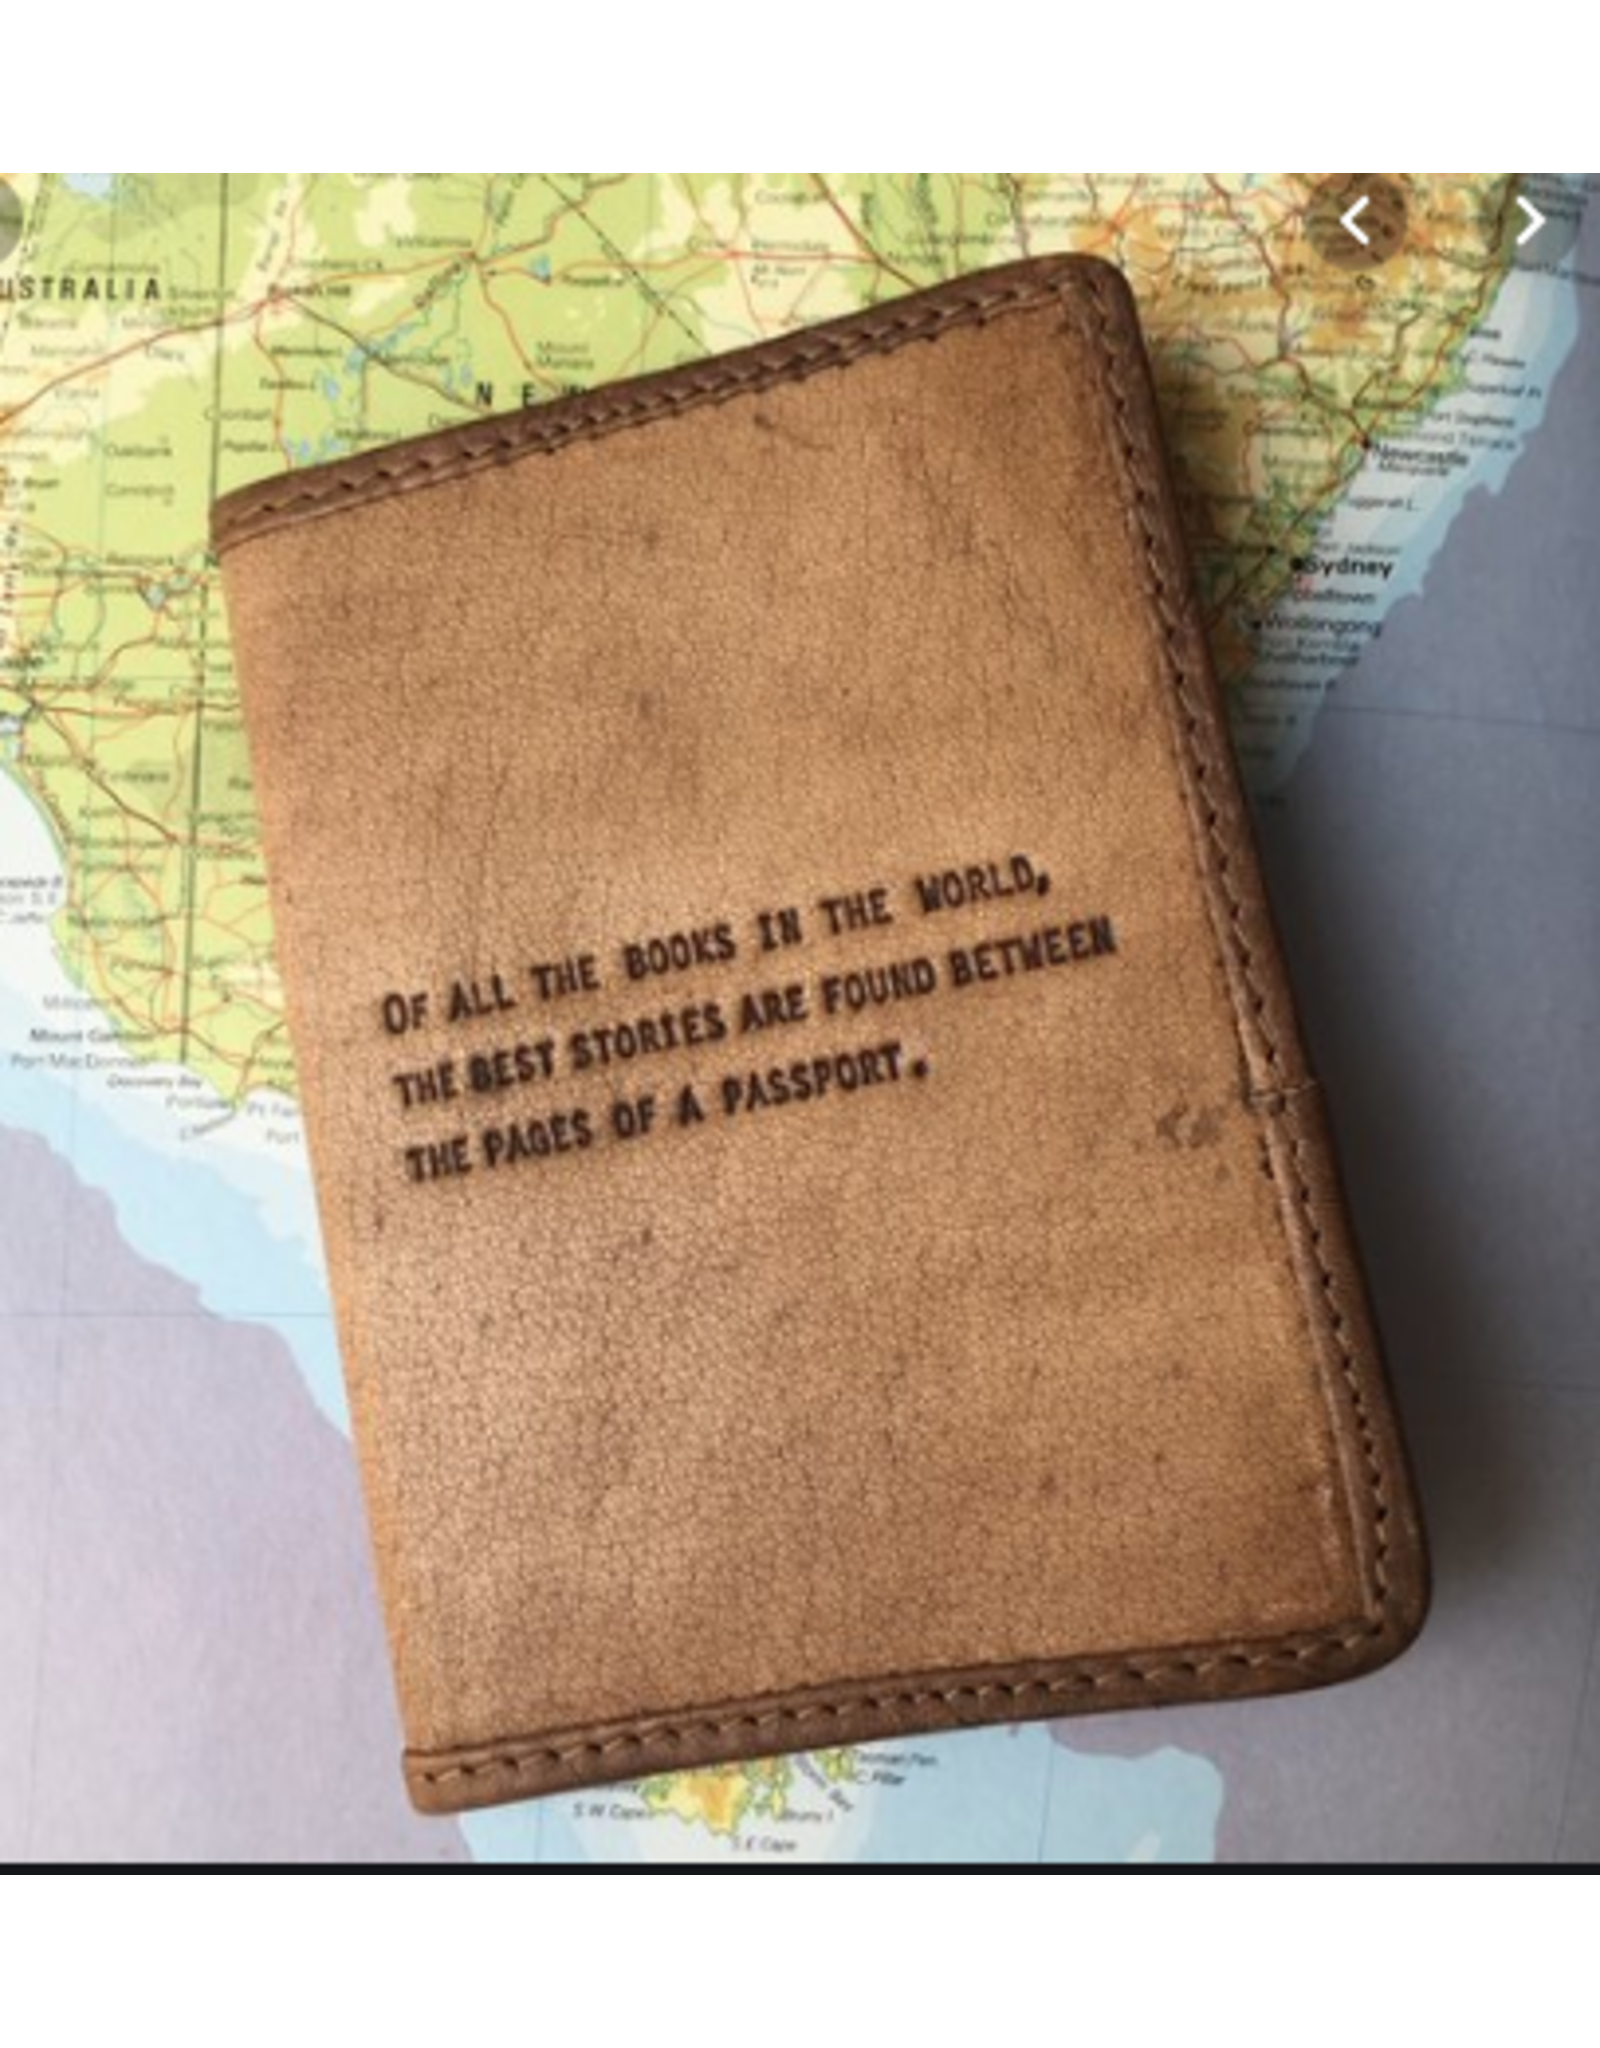 Leather Passport Cover, Of All the Books in the World